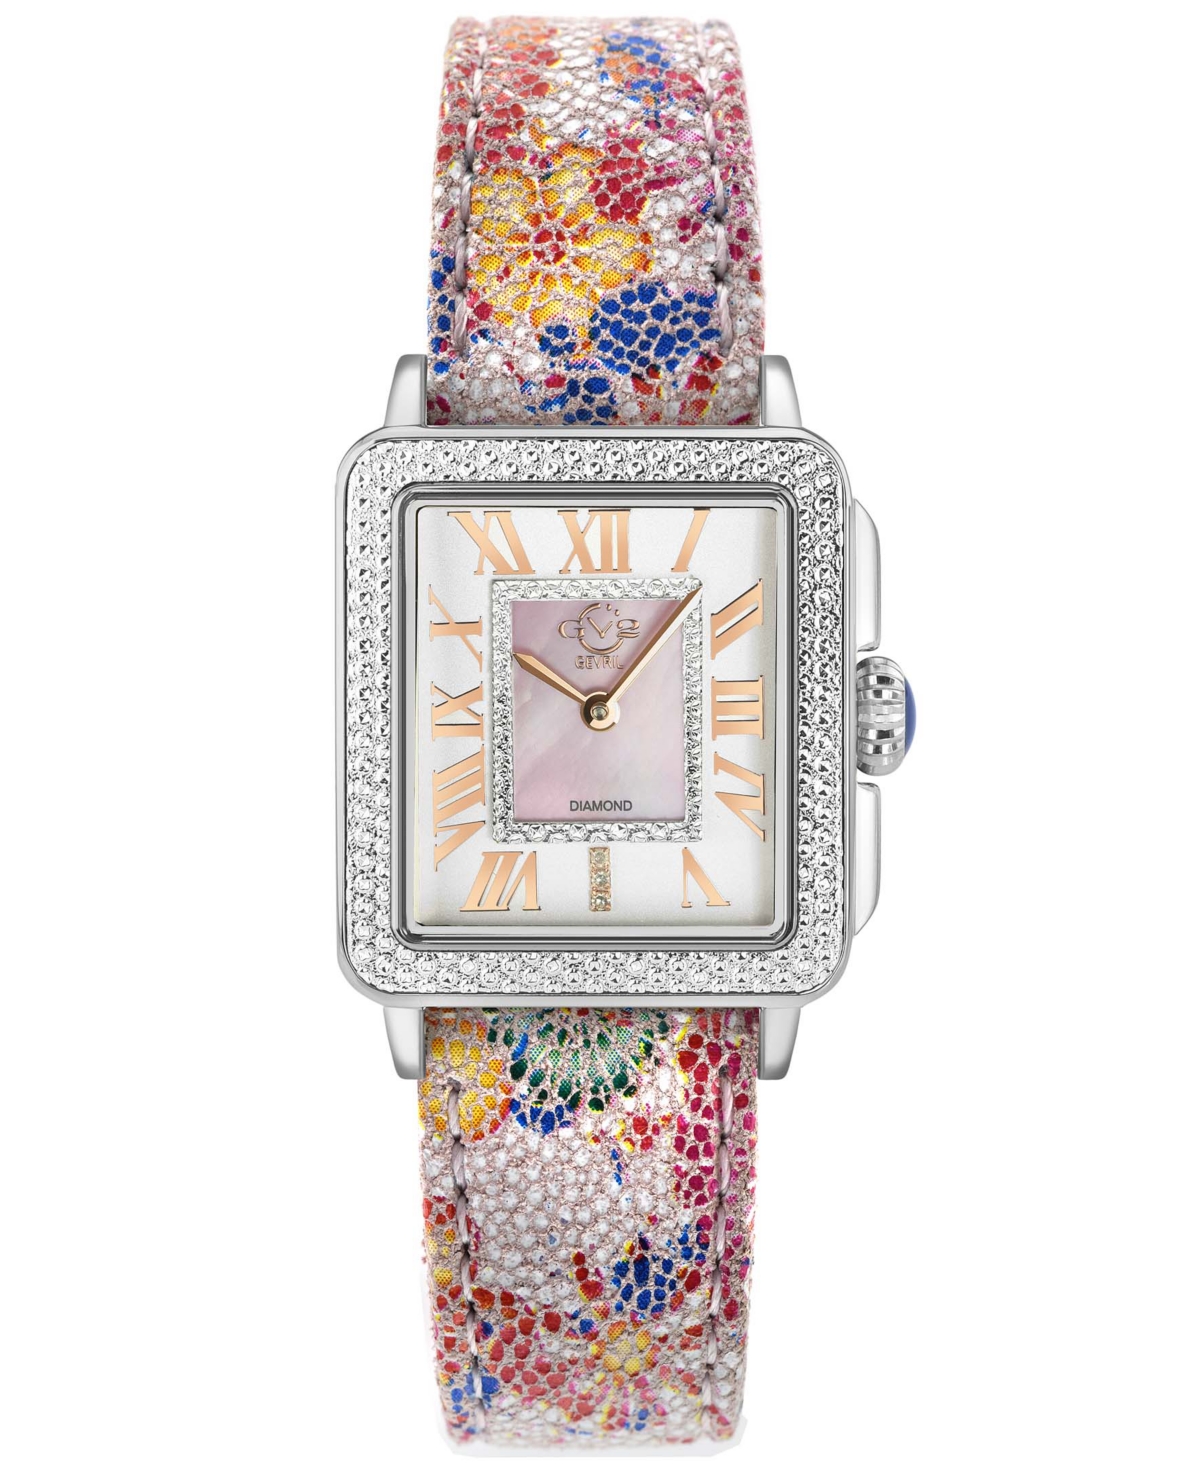 Gv2 By Gevril Women's Swiss Quartz Padova Floral White Leather Watch 30mm